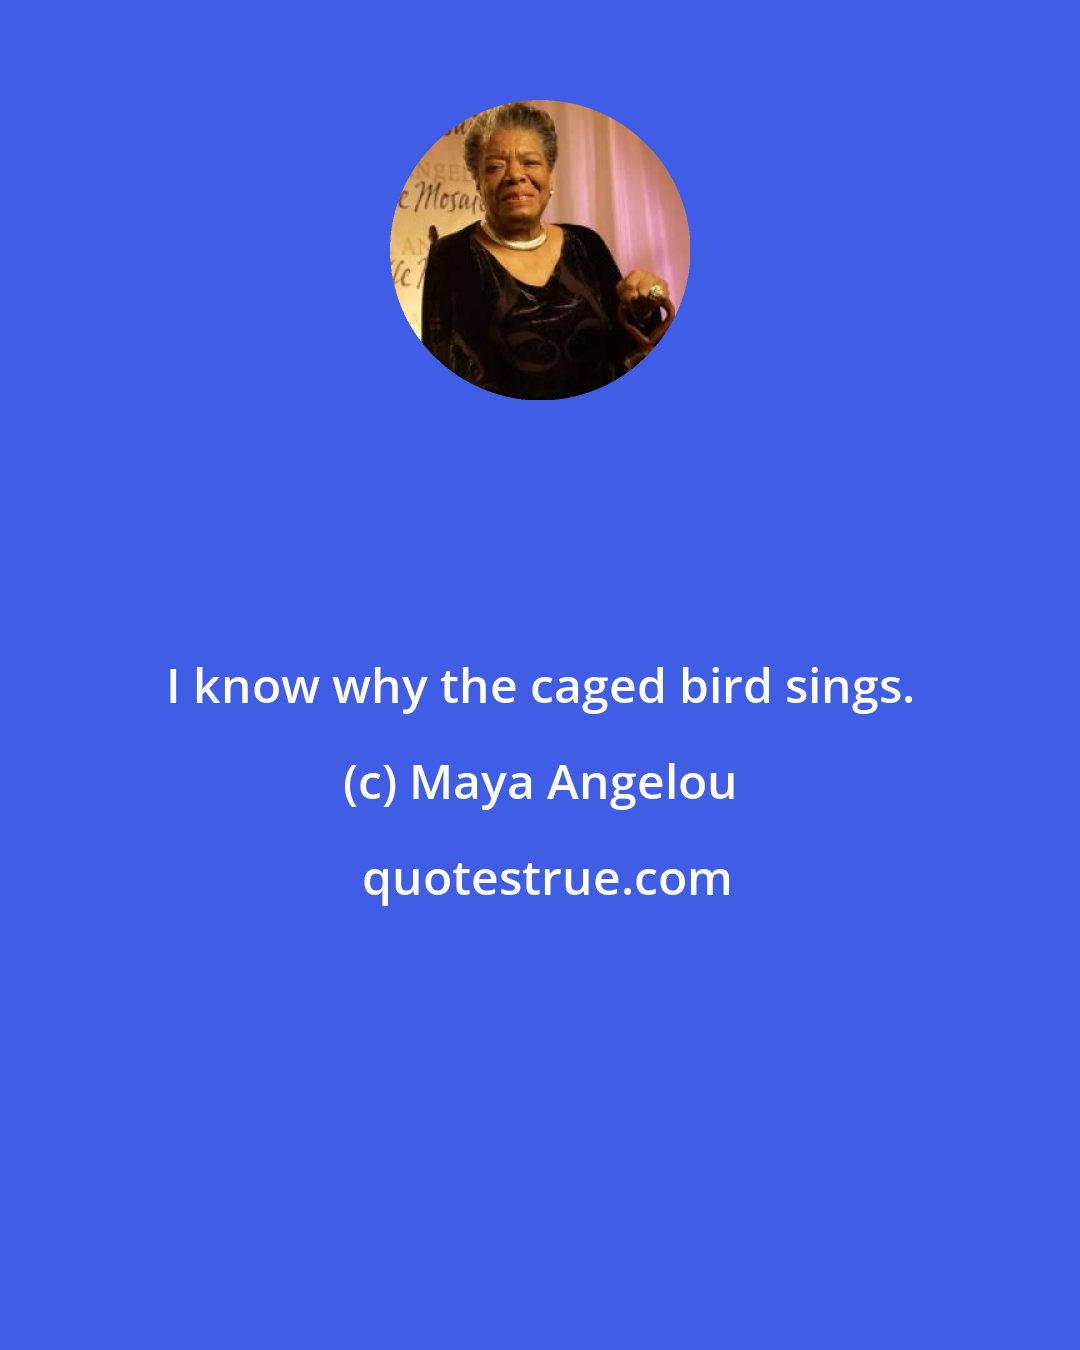 Maya Angelou: I know why the caged bird sings.